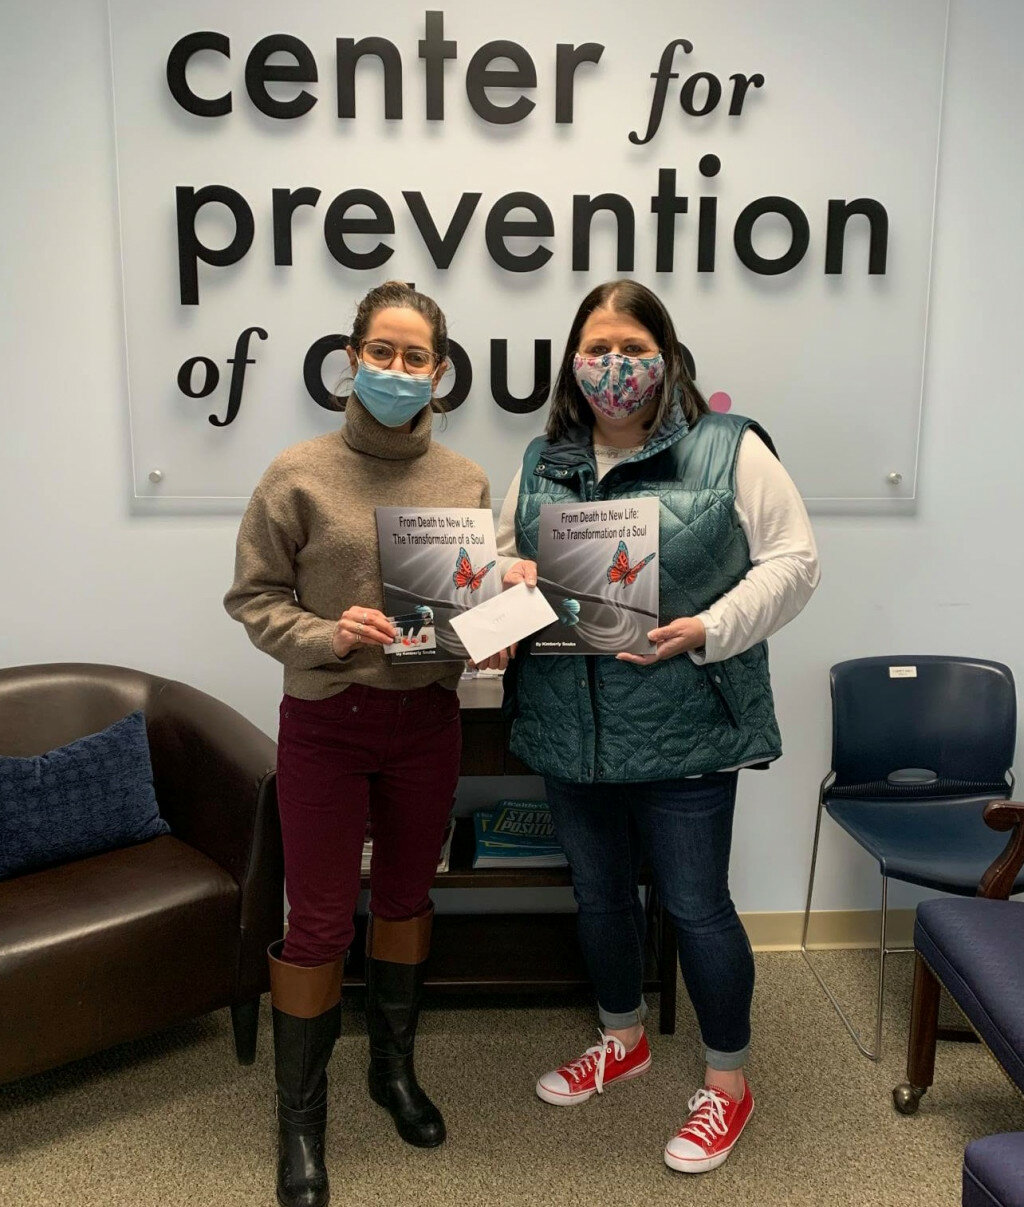 Kimberly Souba, right, donates two copies of her book and the first proceeds check to Camille Yameen, Director of Marketing and Communications for the Center for Prevention of Abuse. (Photo contributed)